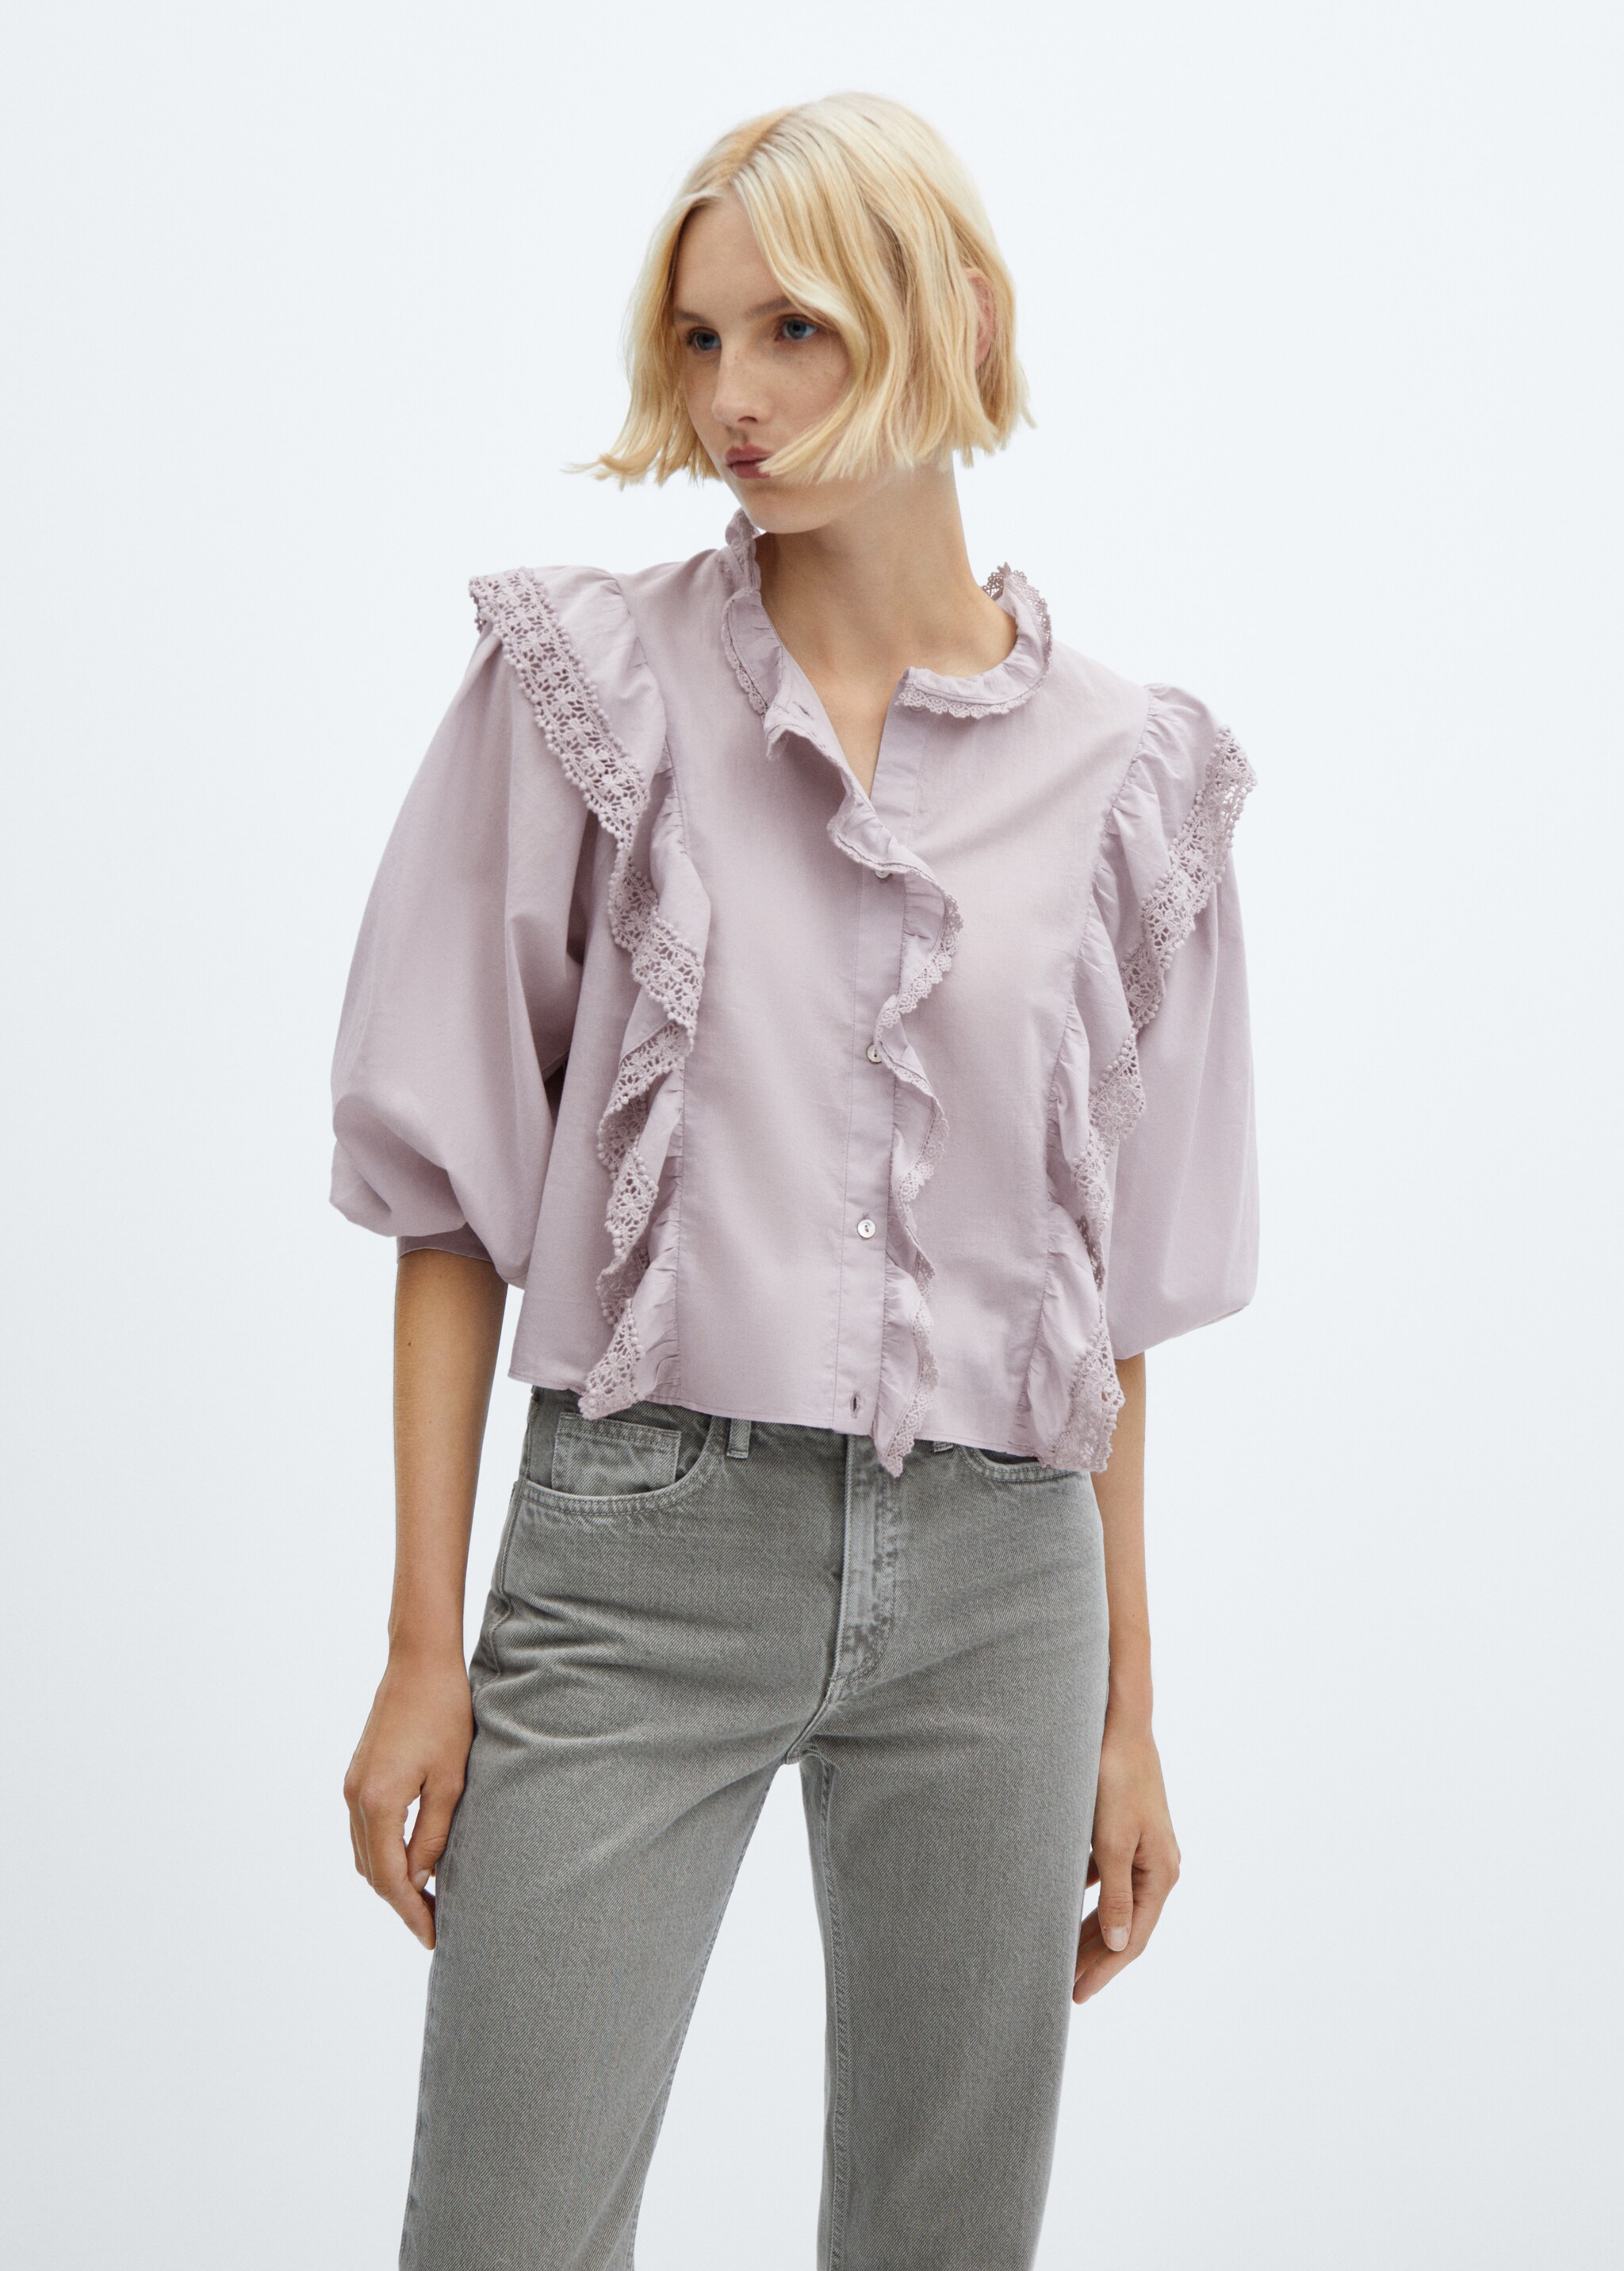 Lace blouse with ruffles - Medium plane